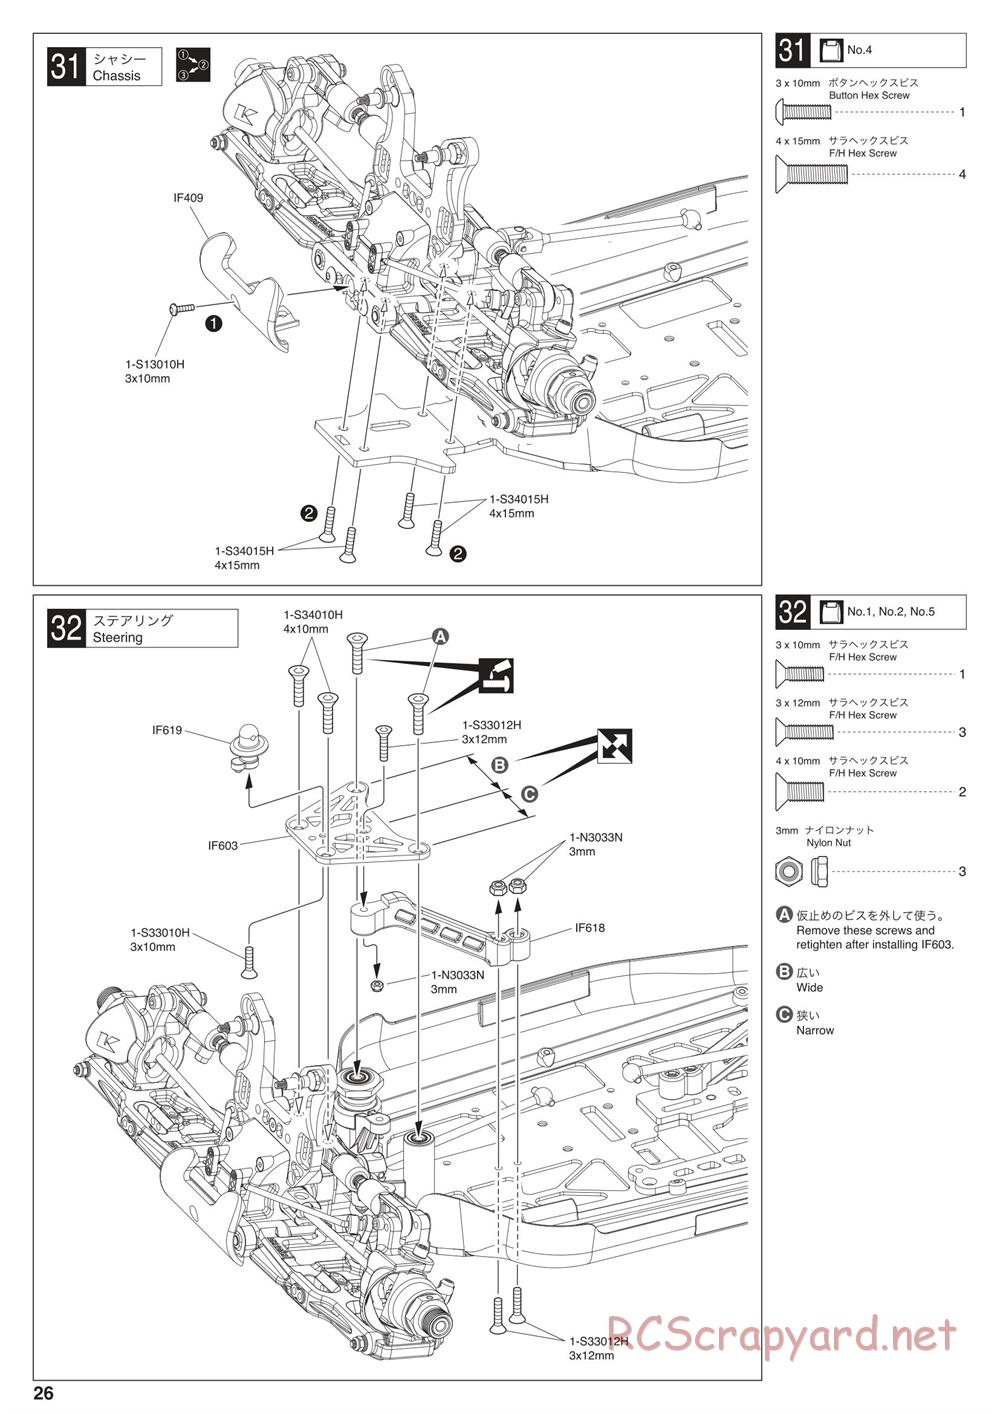 Kyosho - Inferno MP10 - Manual - Page 26